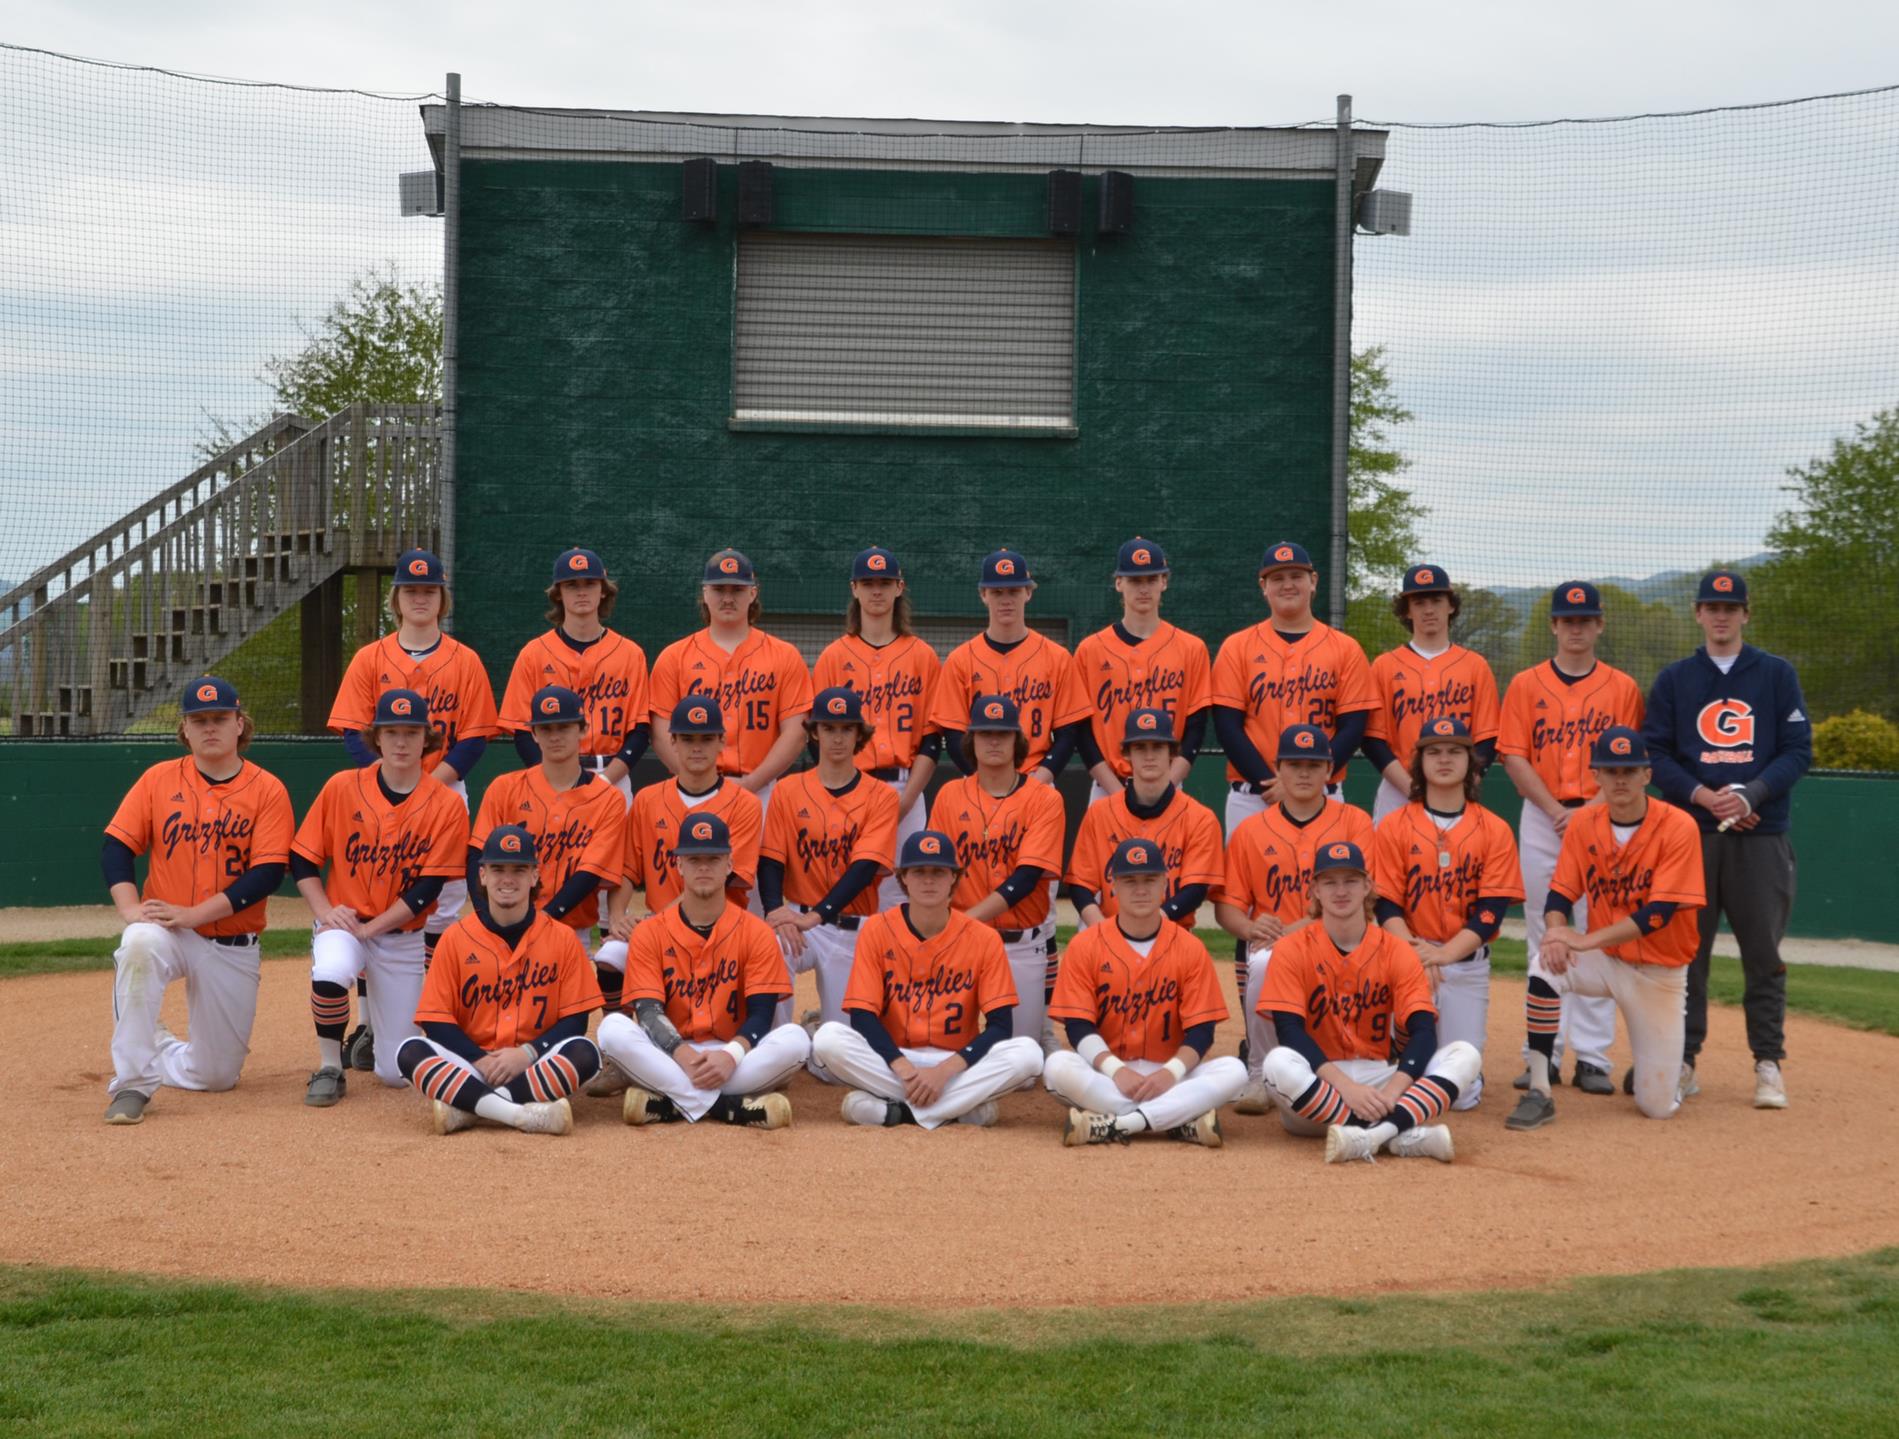 Baseball team picture